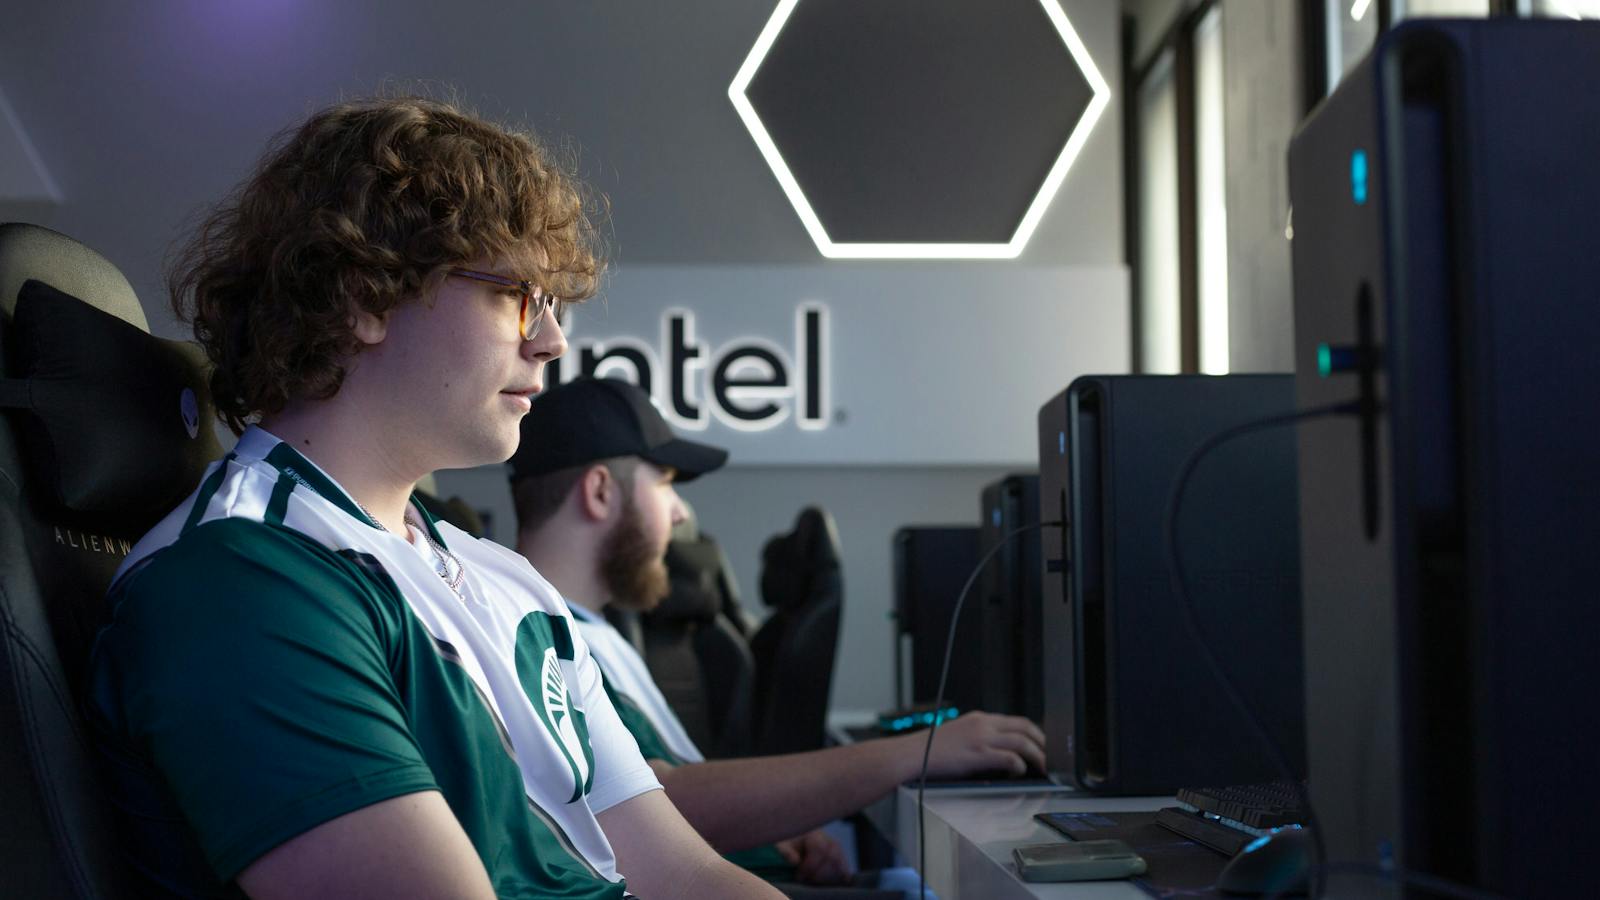 MSU unveils Alienware Esports Lounge for student learning, connection